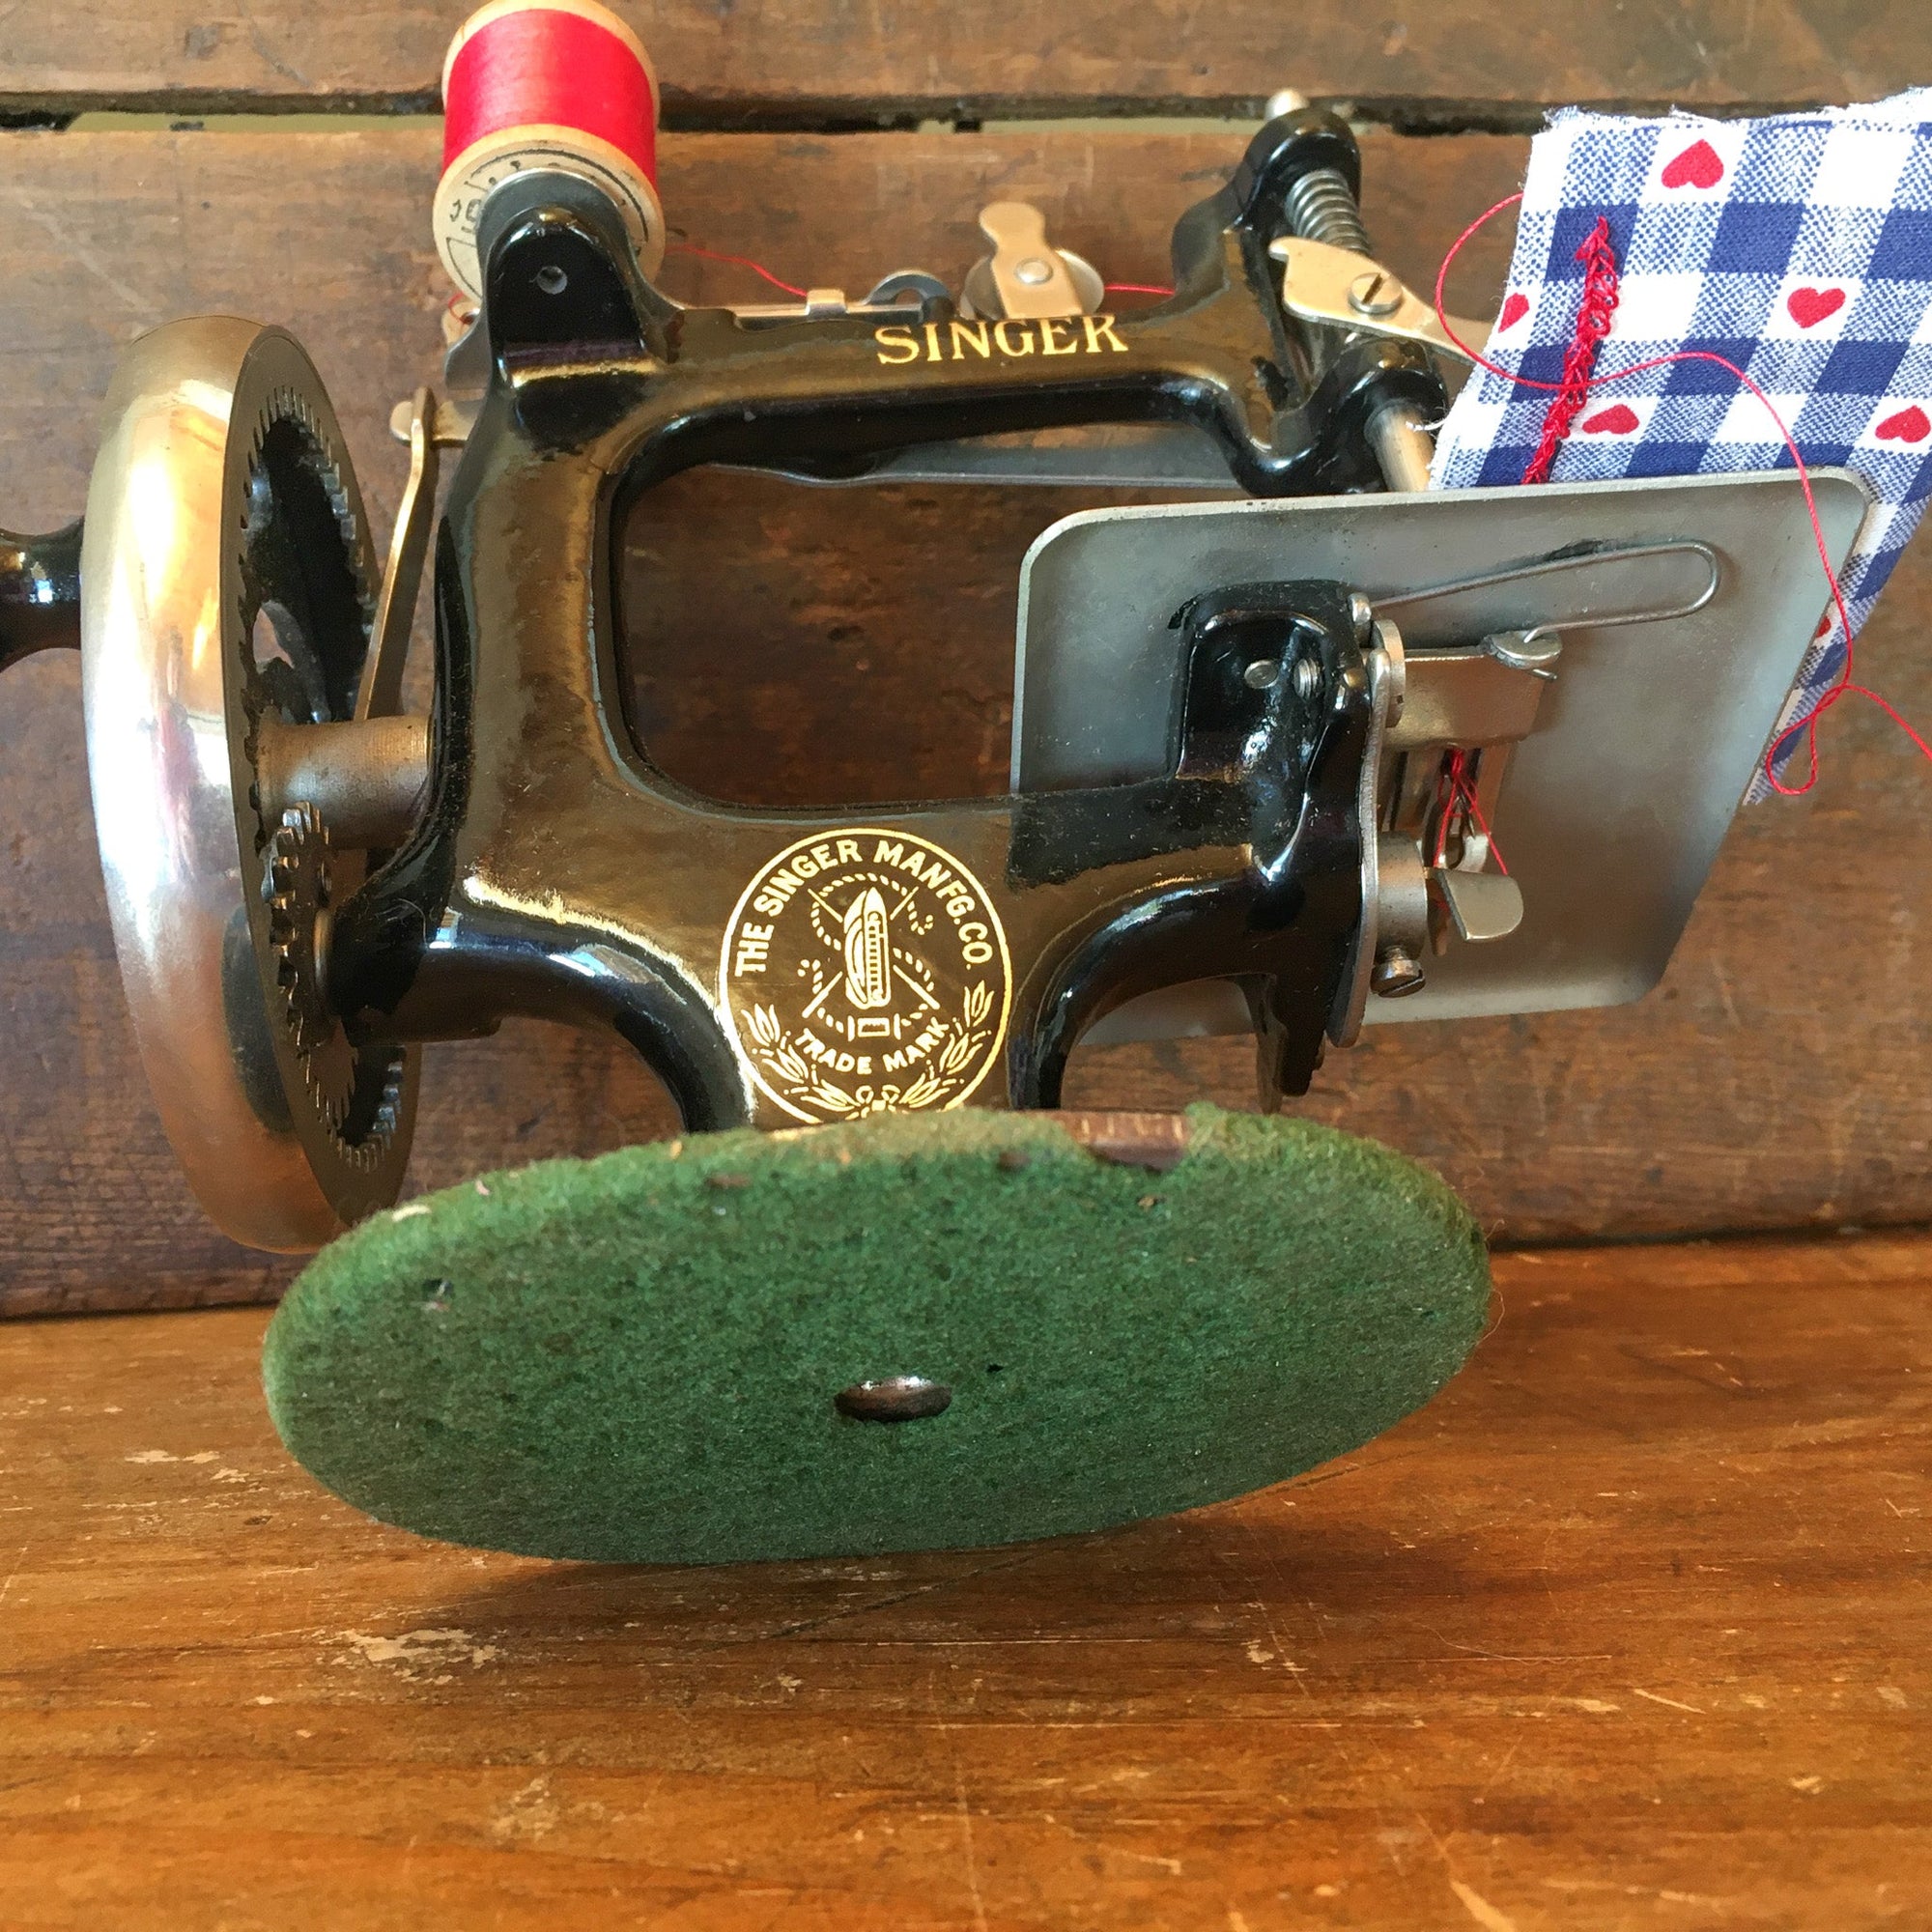 1920’s – 1930’s Singer Toy Sewing Machine with Original Box